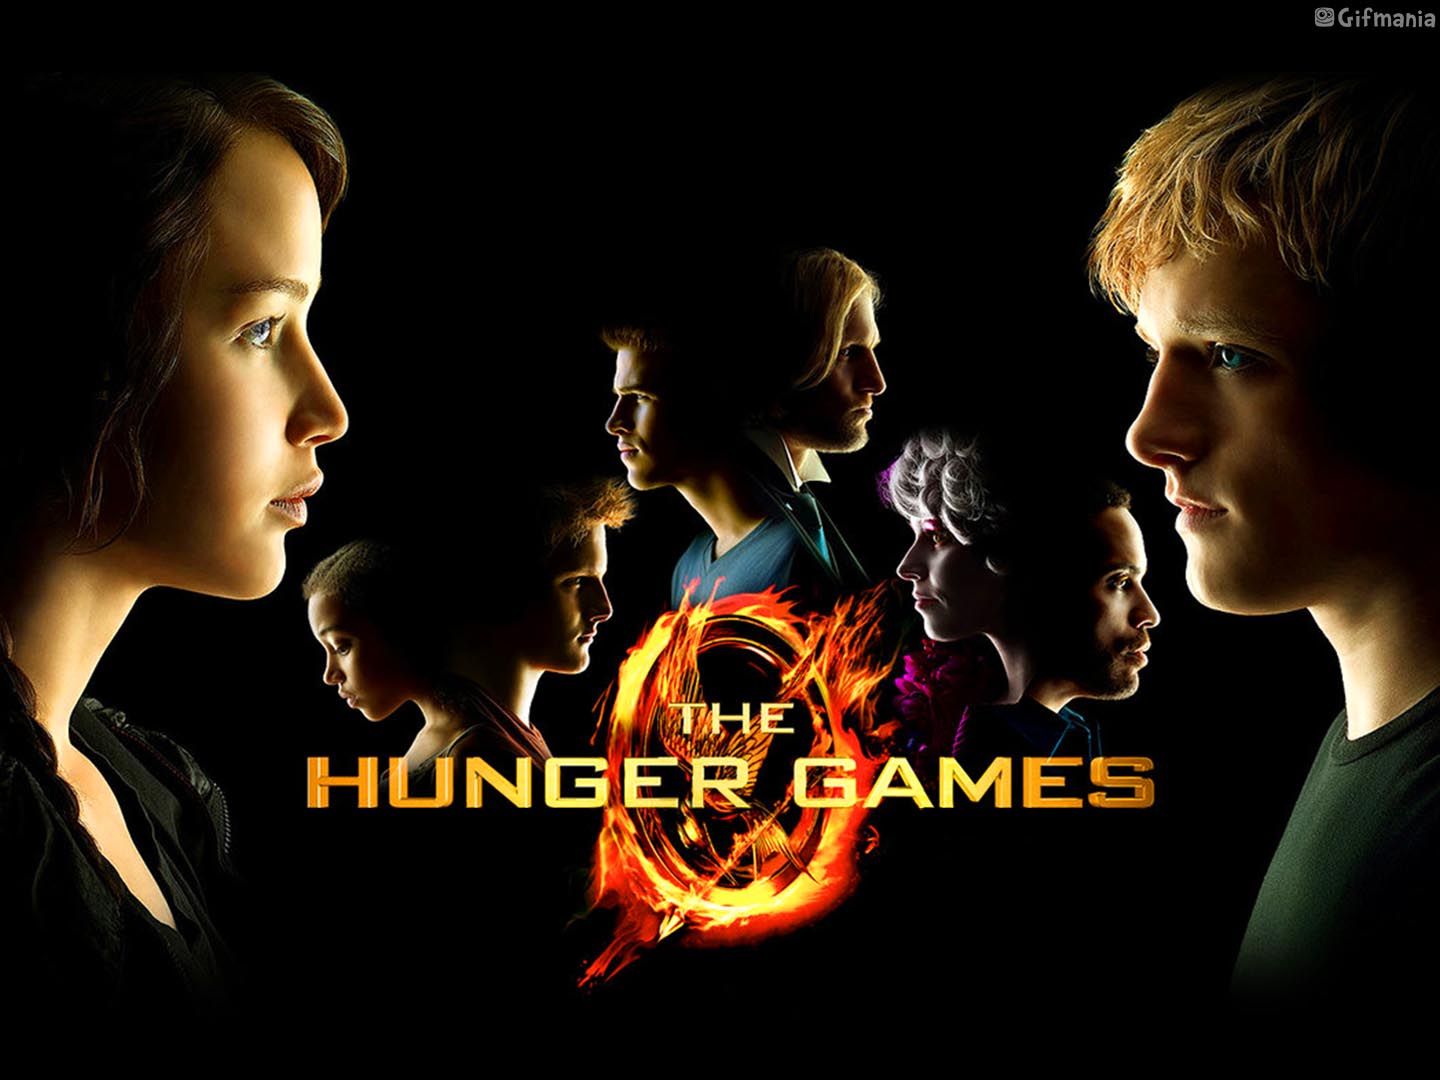 Happy Hunger Games! And may the odds be ever in your favor!. Let There Be Movies